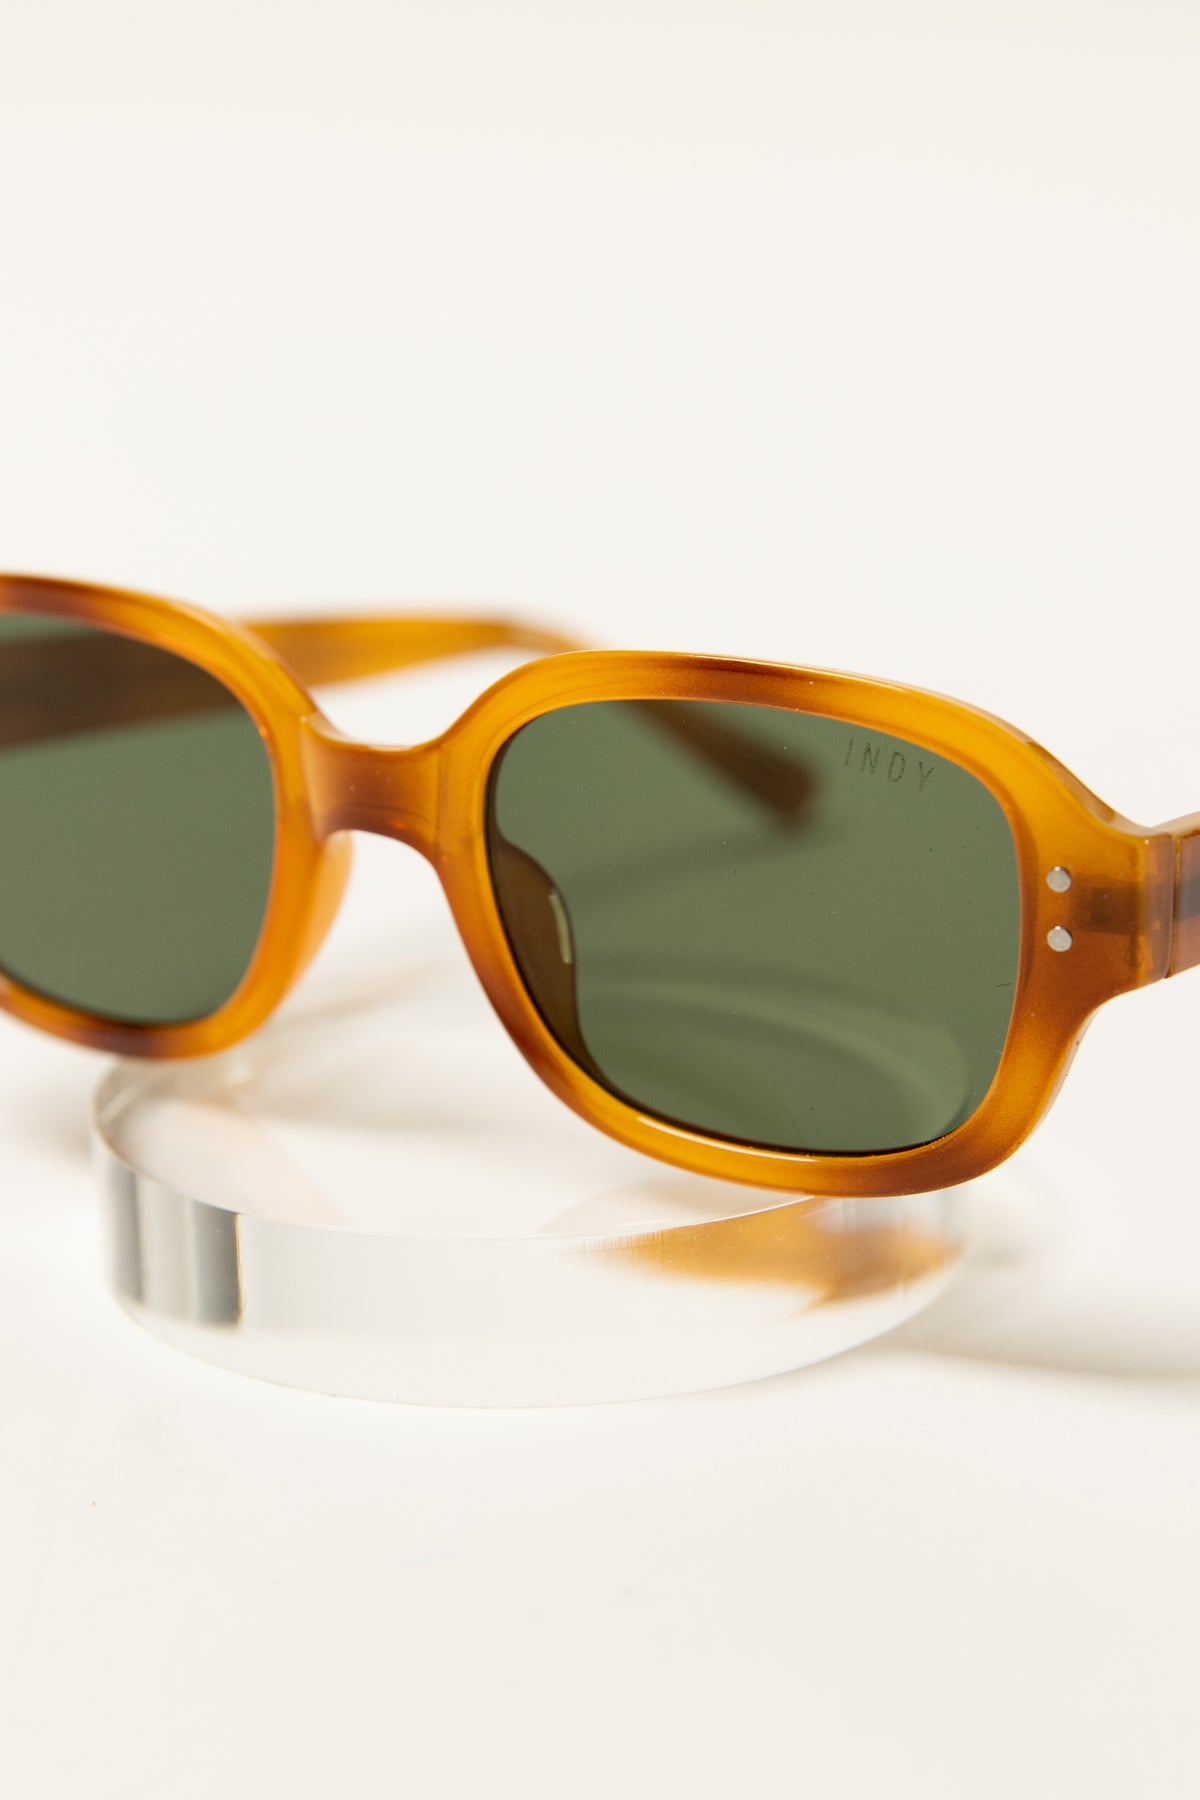 amber tortoise frame billie by Indy sunglasses